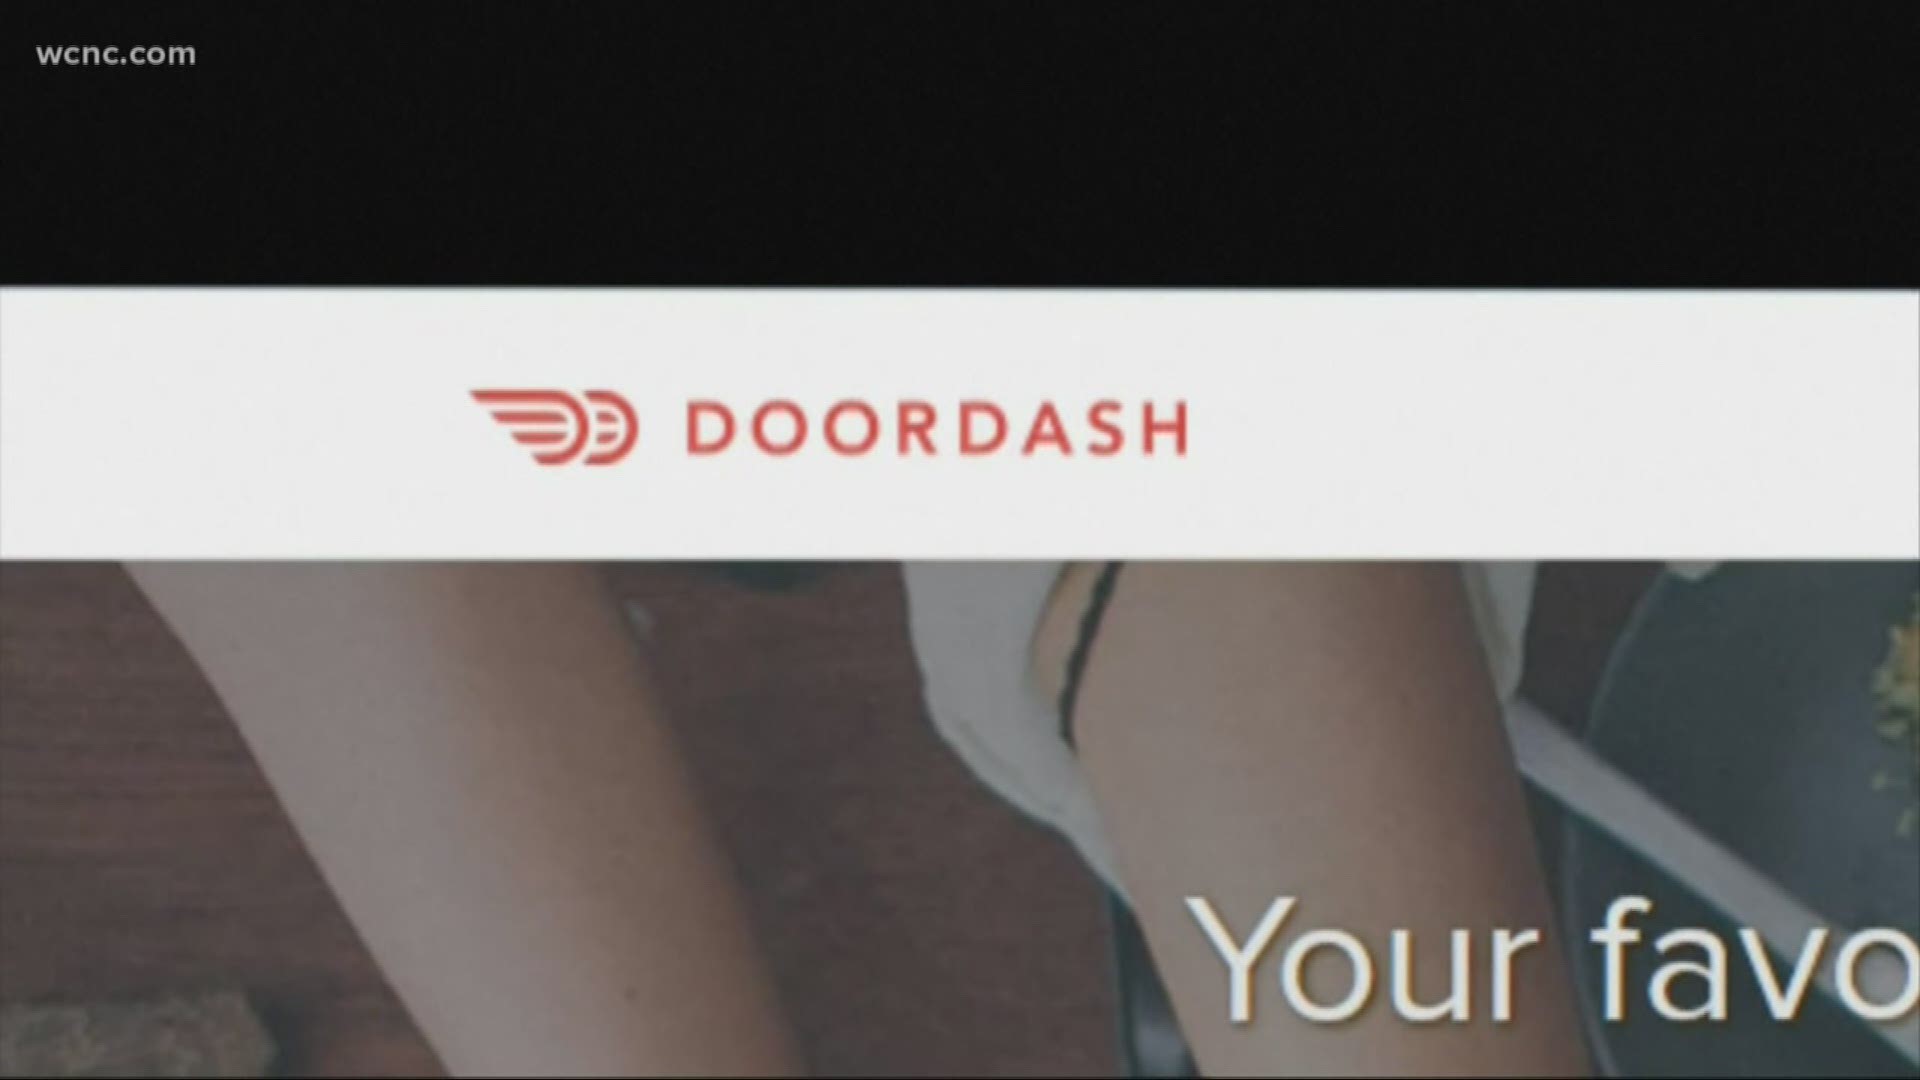 If you joined DoorDash on or before April 5, 2018, you may have been affected by a data breach impacting nearly 5 million people.